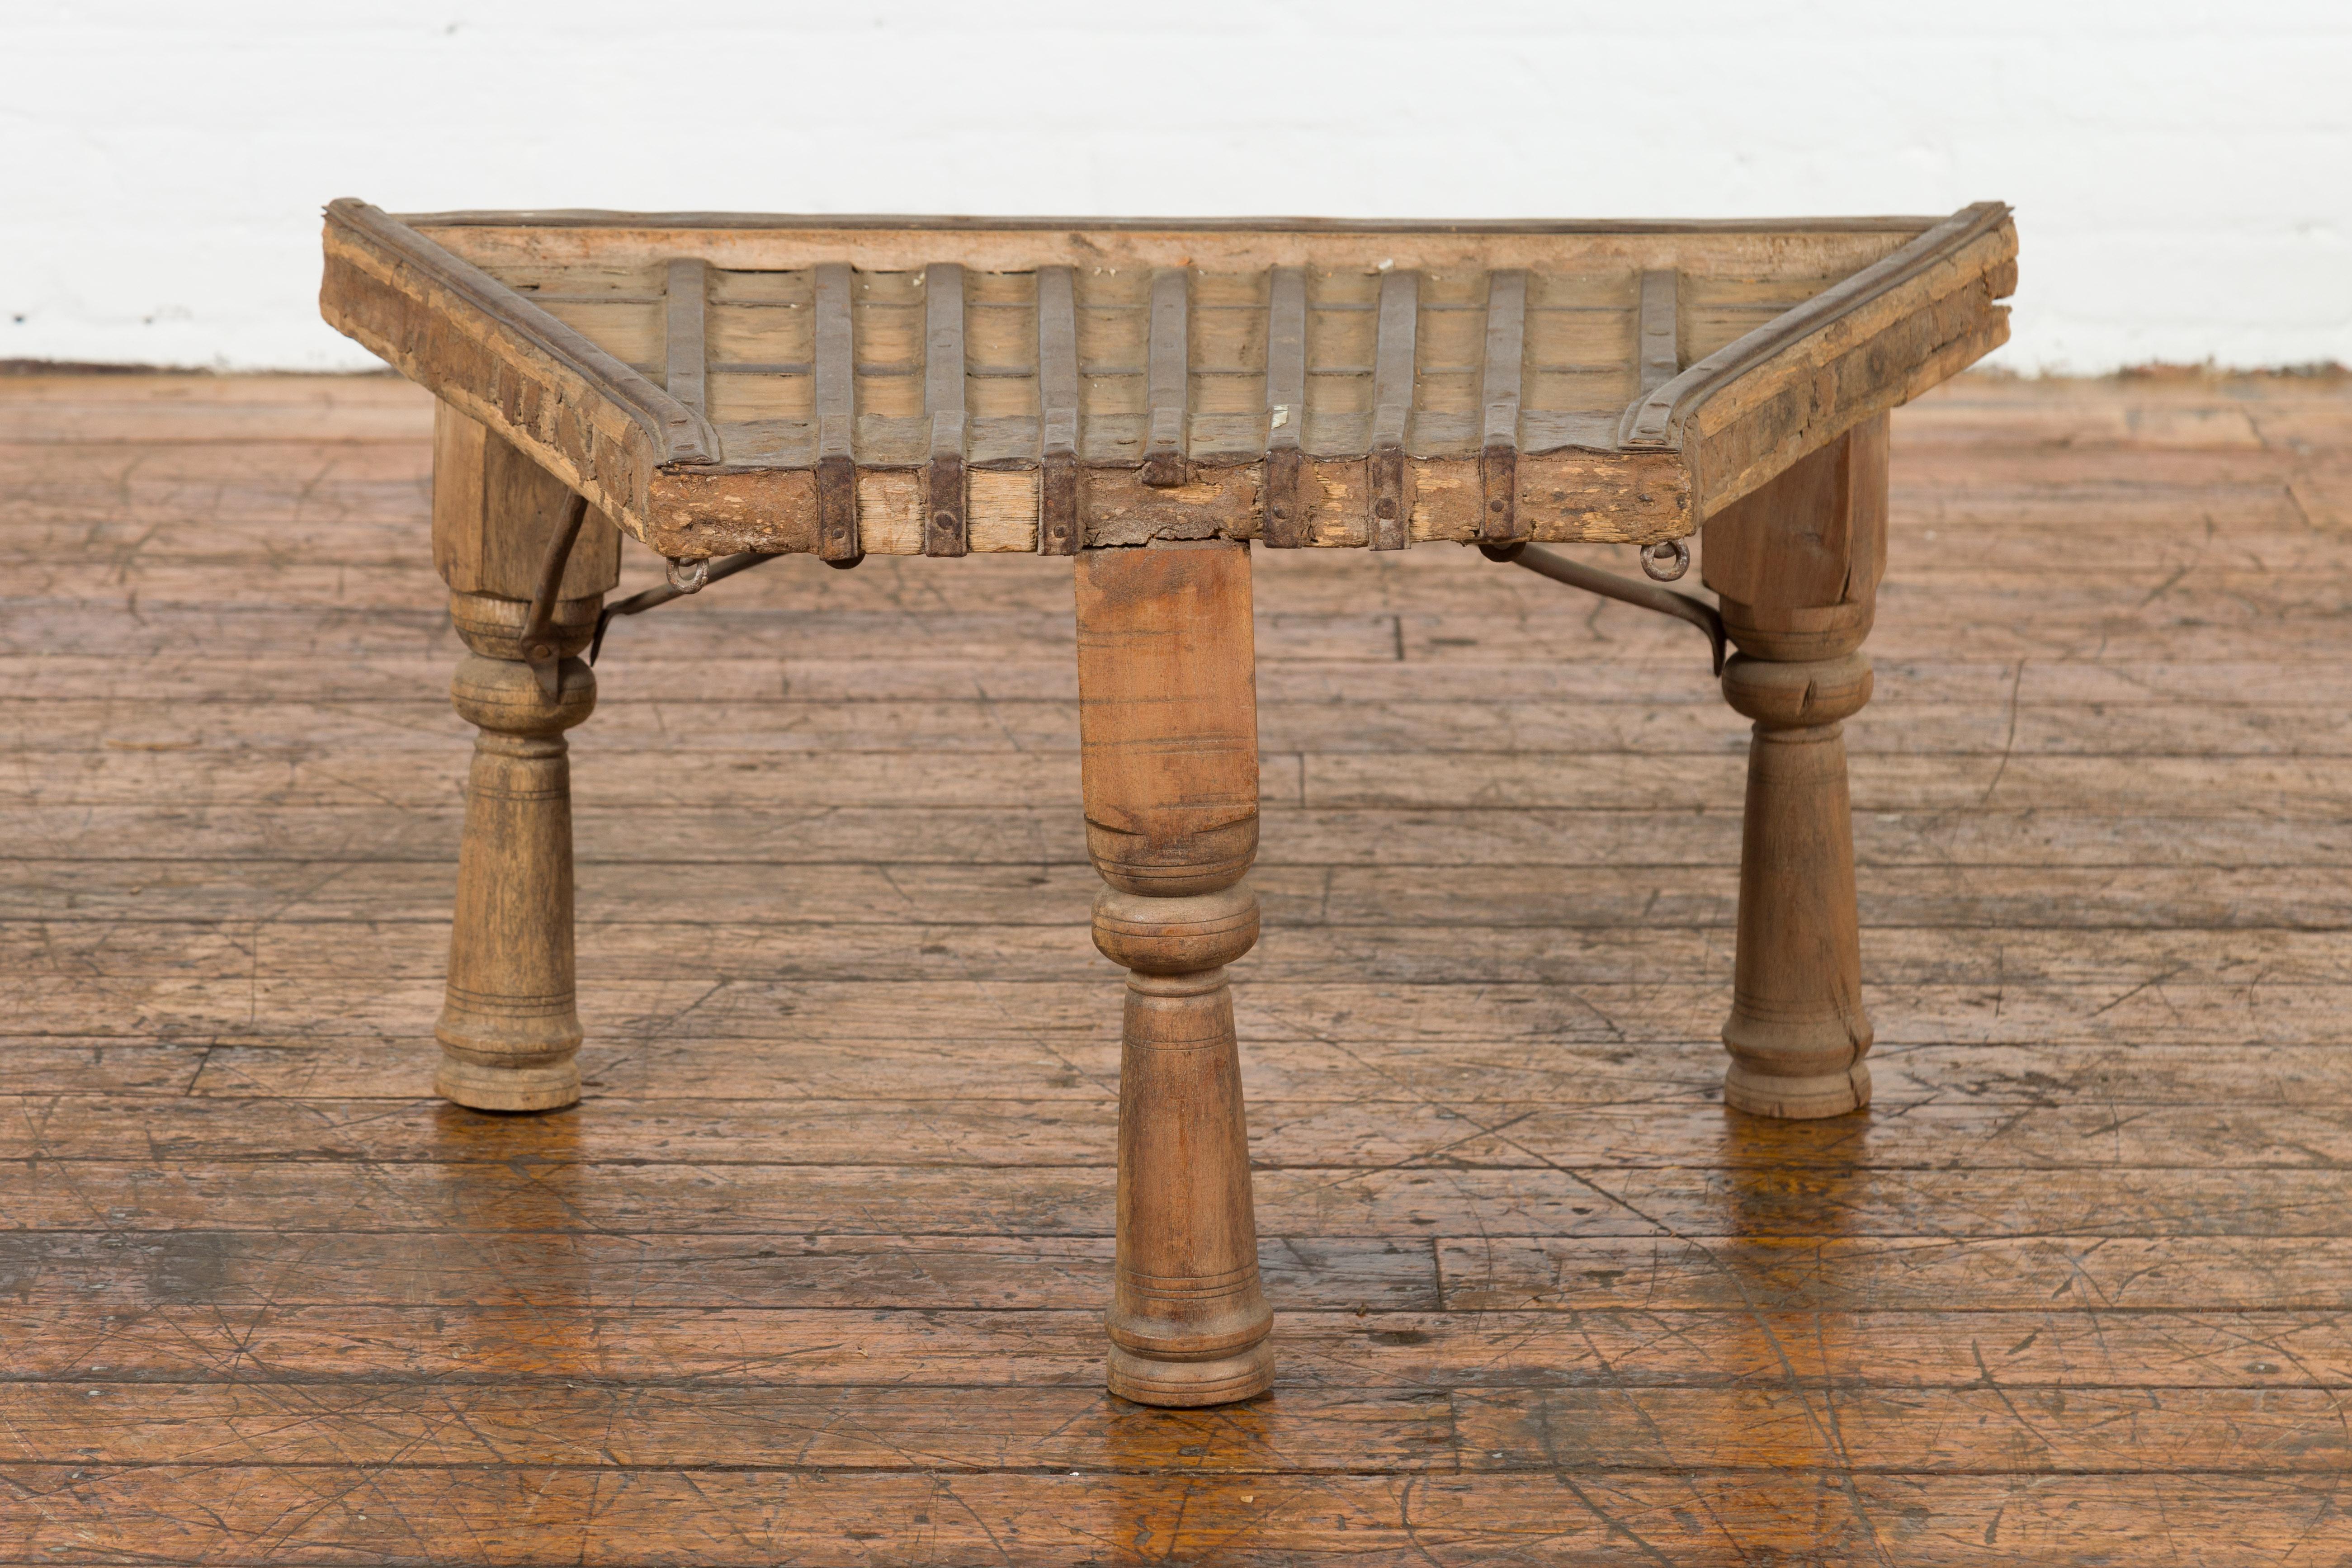 An antique rustic Indian handmade coffee table from the 19th century with trapezoidal top, protruding front, iron stretchers, turned baluster legs and weathered patina. Take a journey back in time with this 19th-century rustic Indian handmade coffee